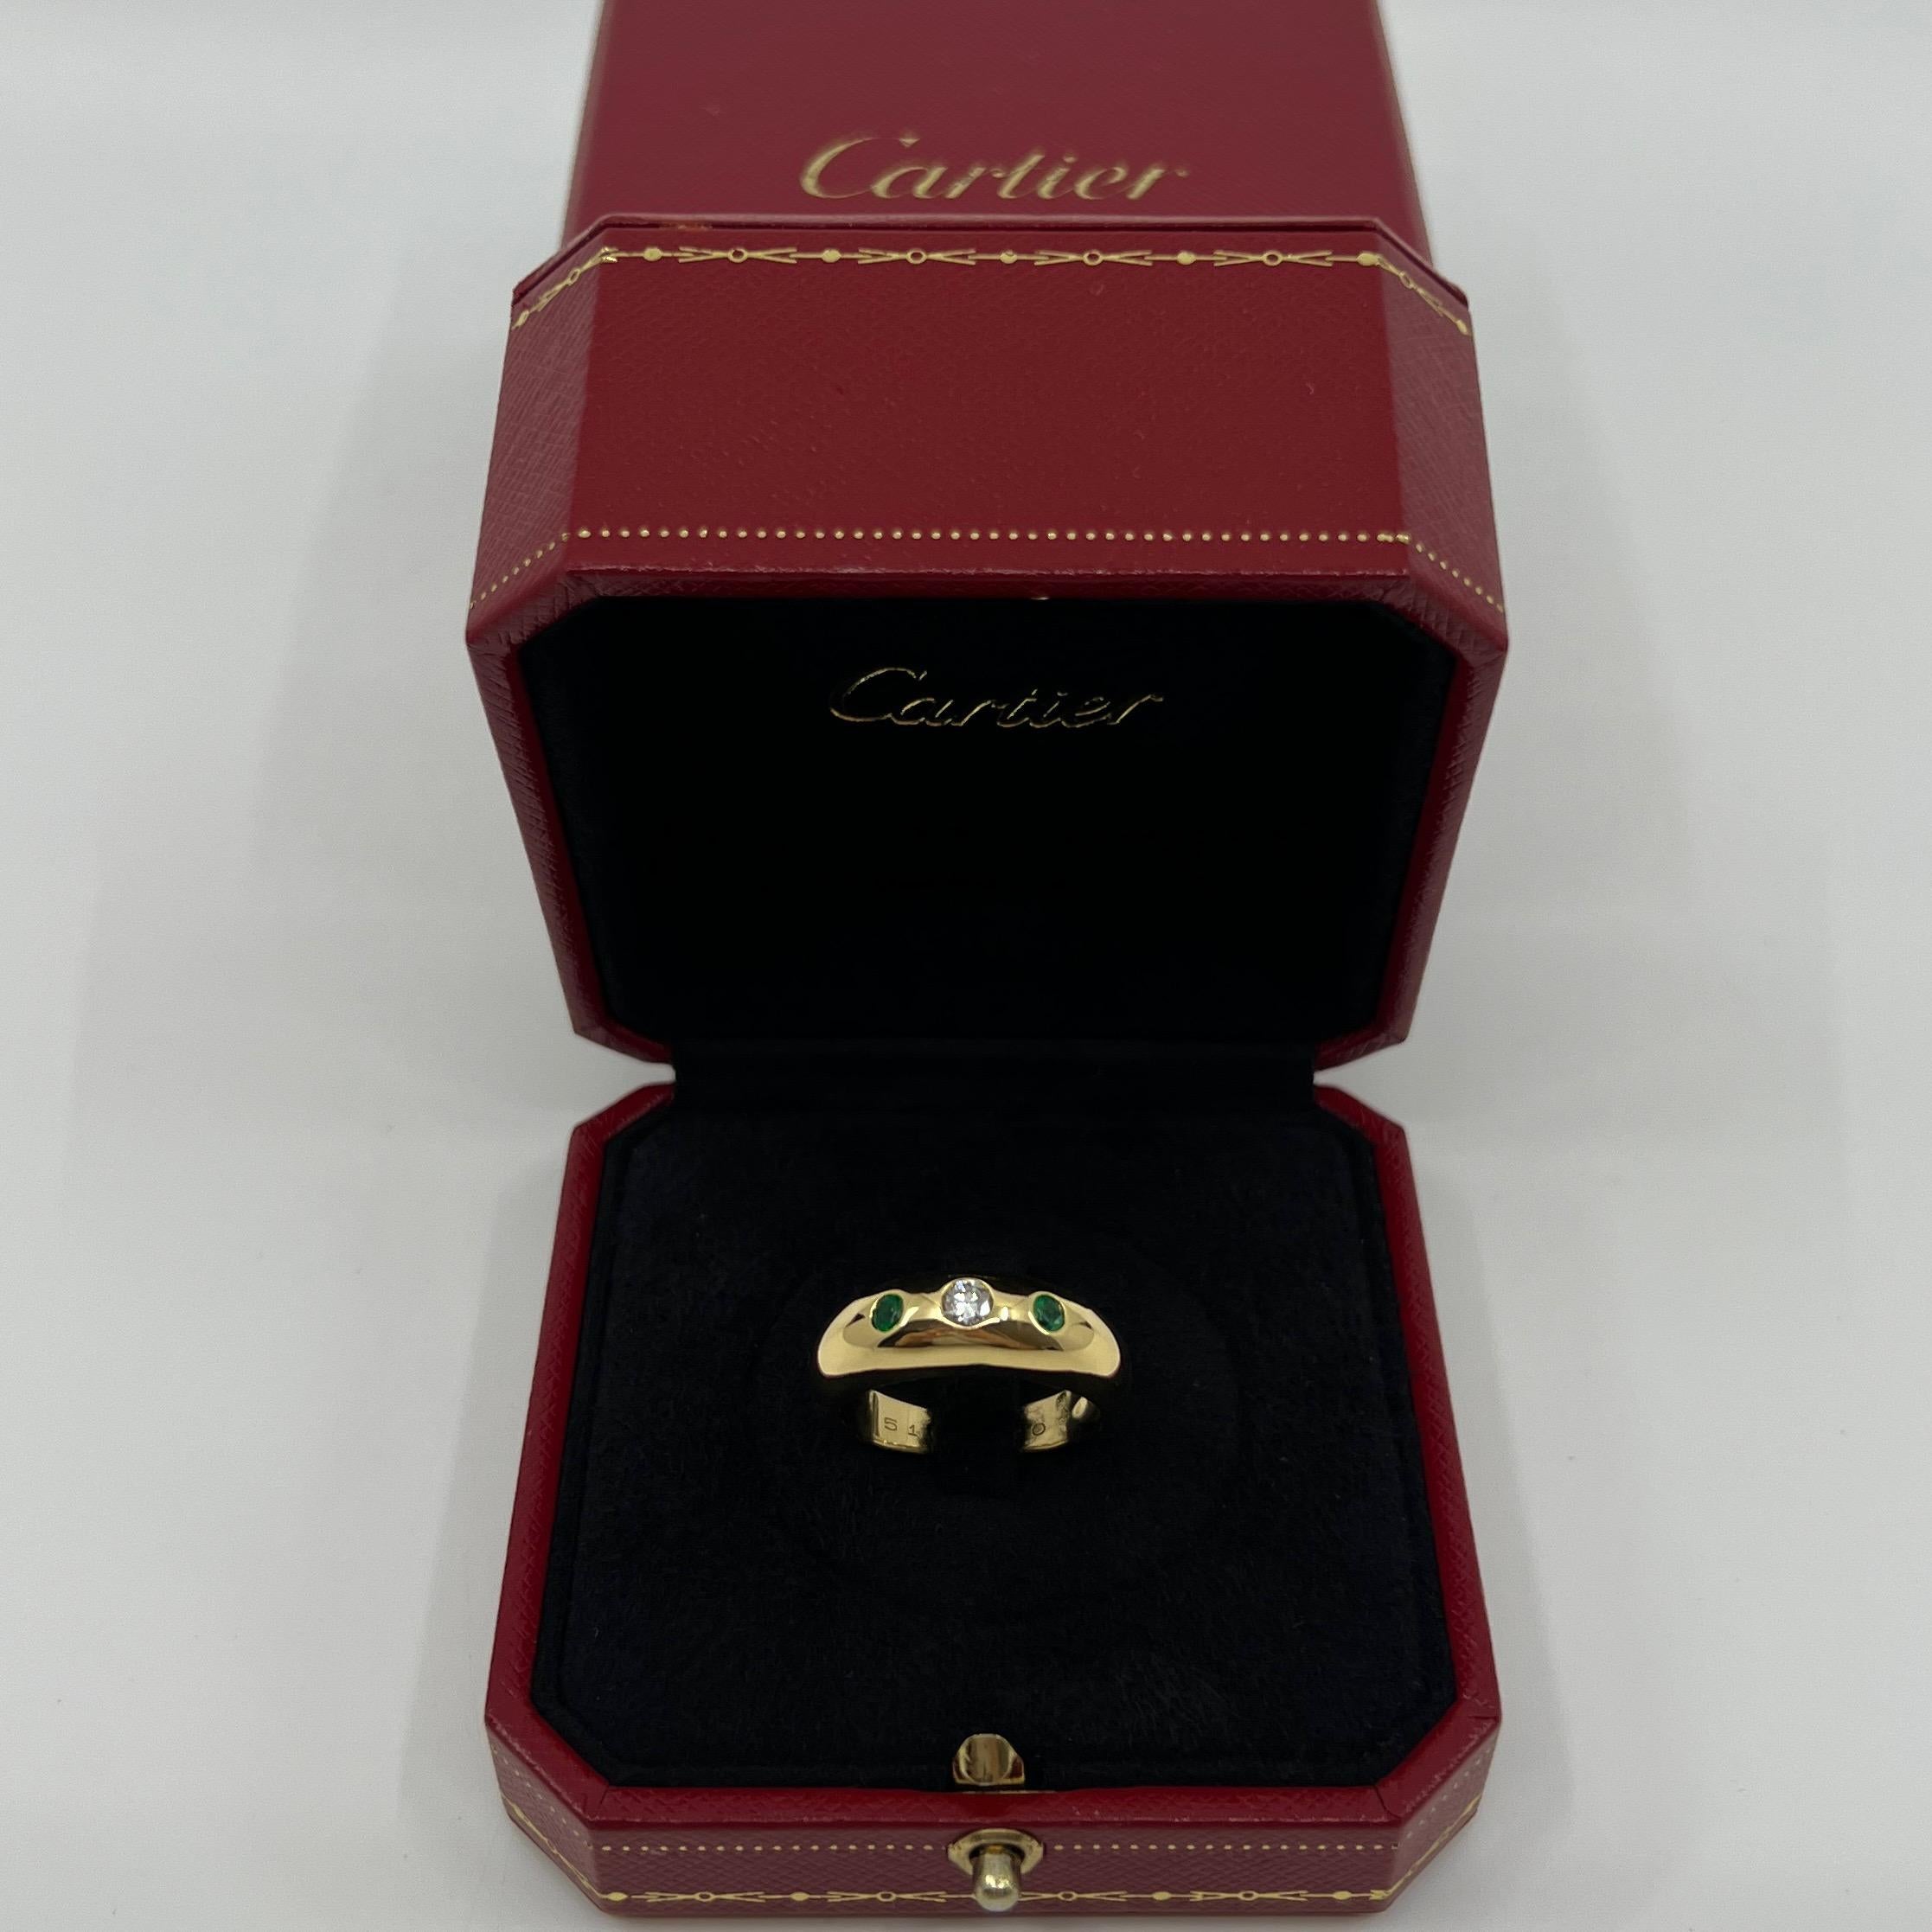 Large Size Vintage Cartier Diamond And Emerald 18k Yellow Gold Three Stone Dome Signet Ring.

Stunning yellow gold Cartier ring set with a beautiful 3.5mm centre diamond with F/G Colour and VVS clarity. This is accented by 2 fine green emeralds